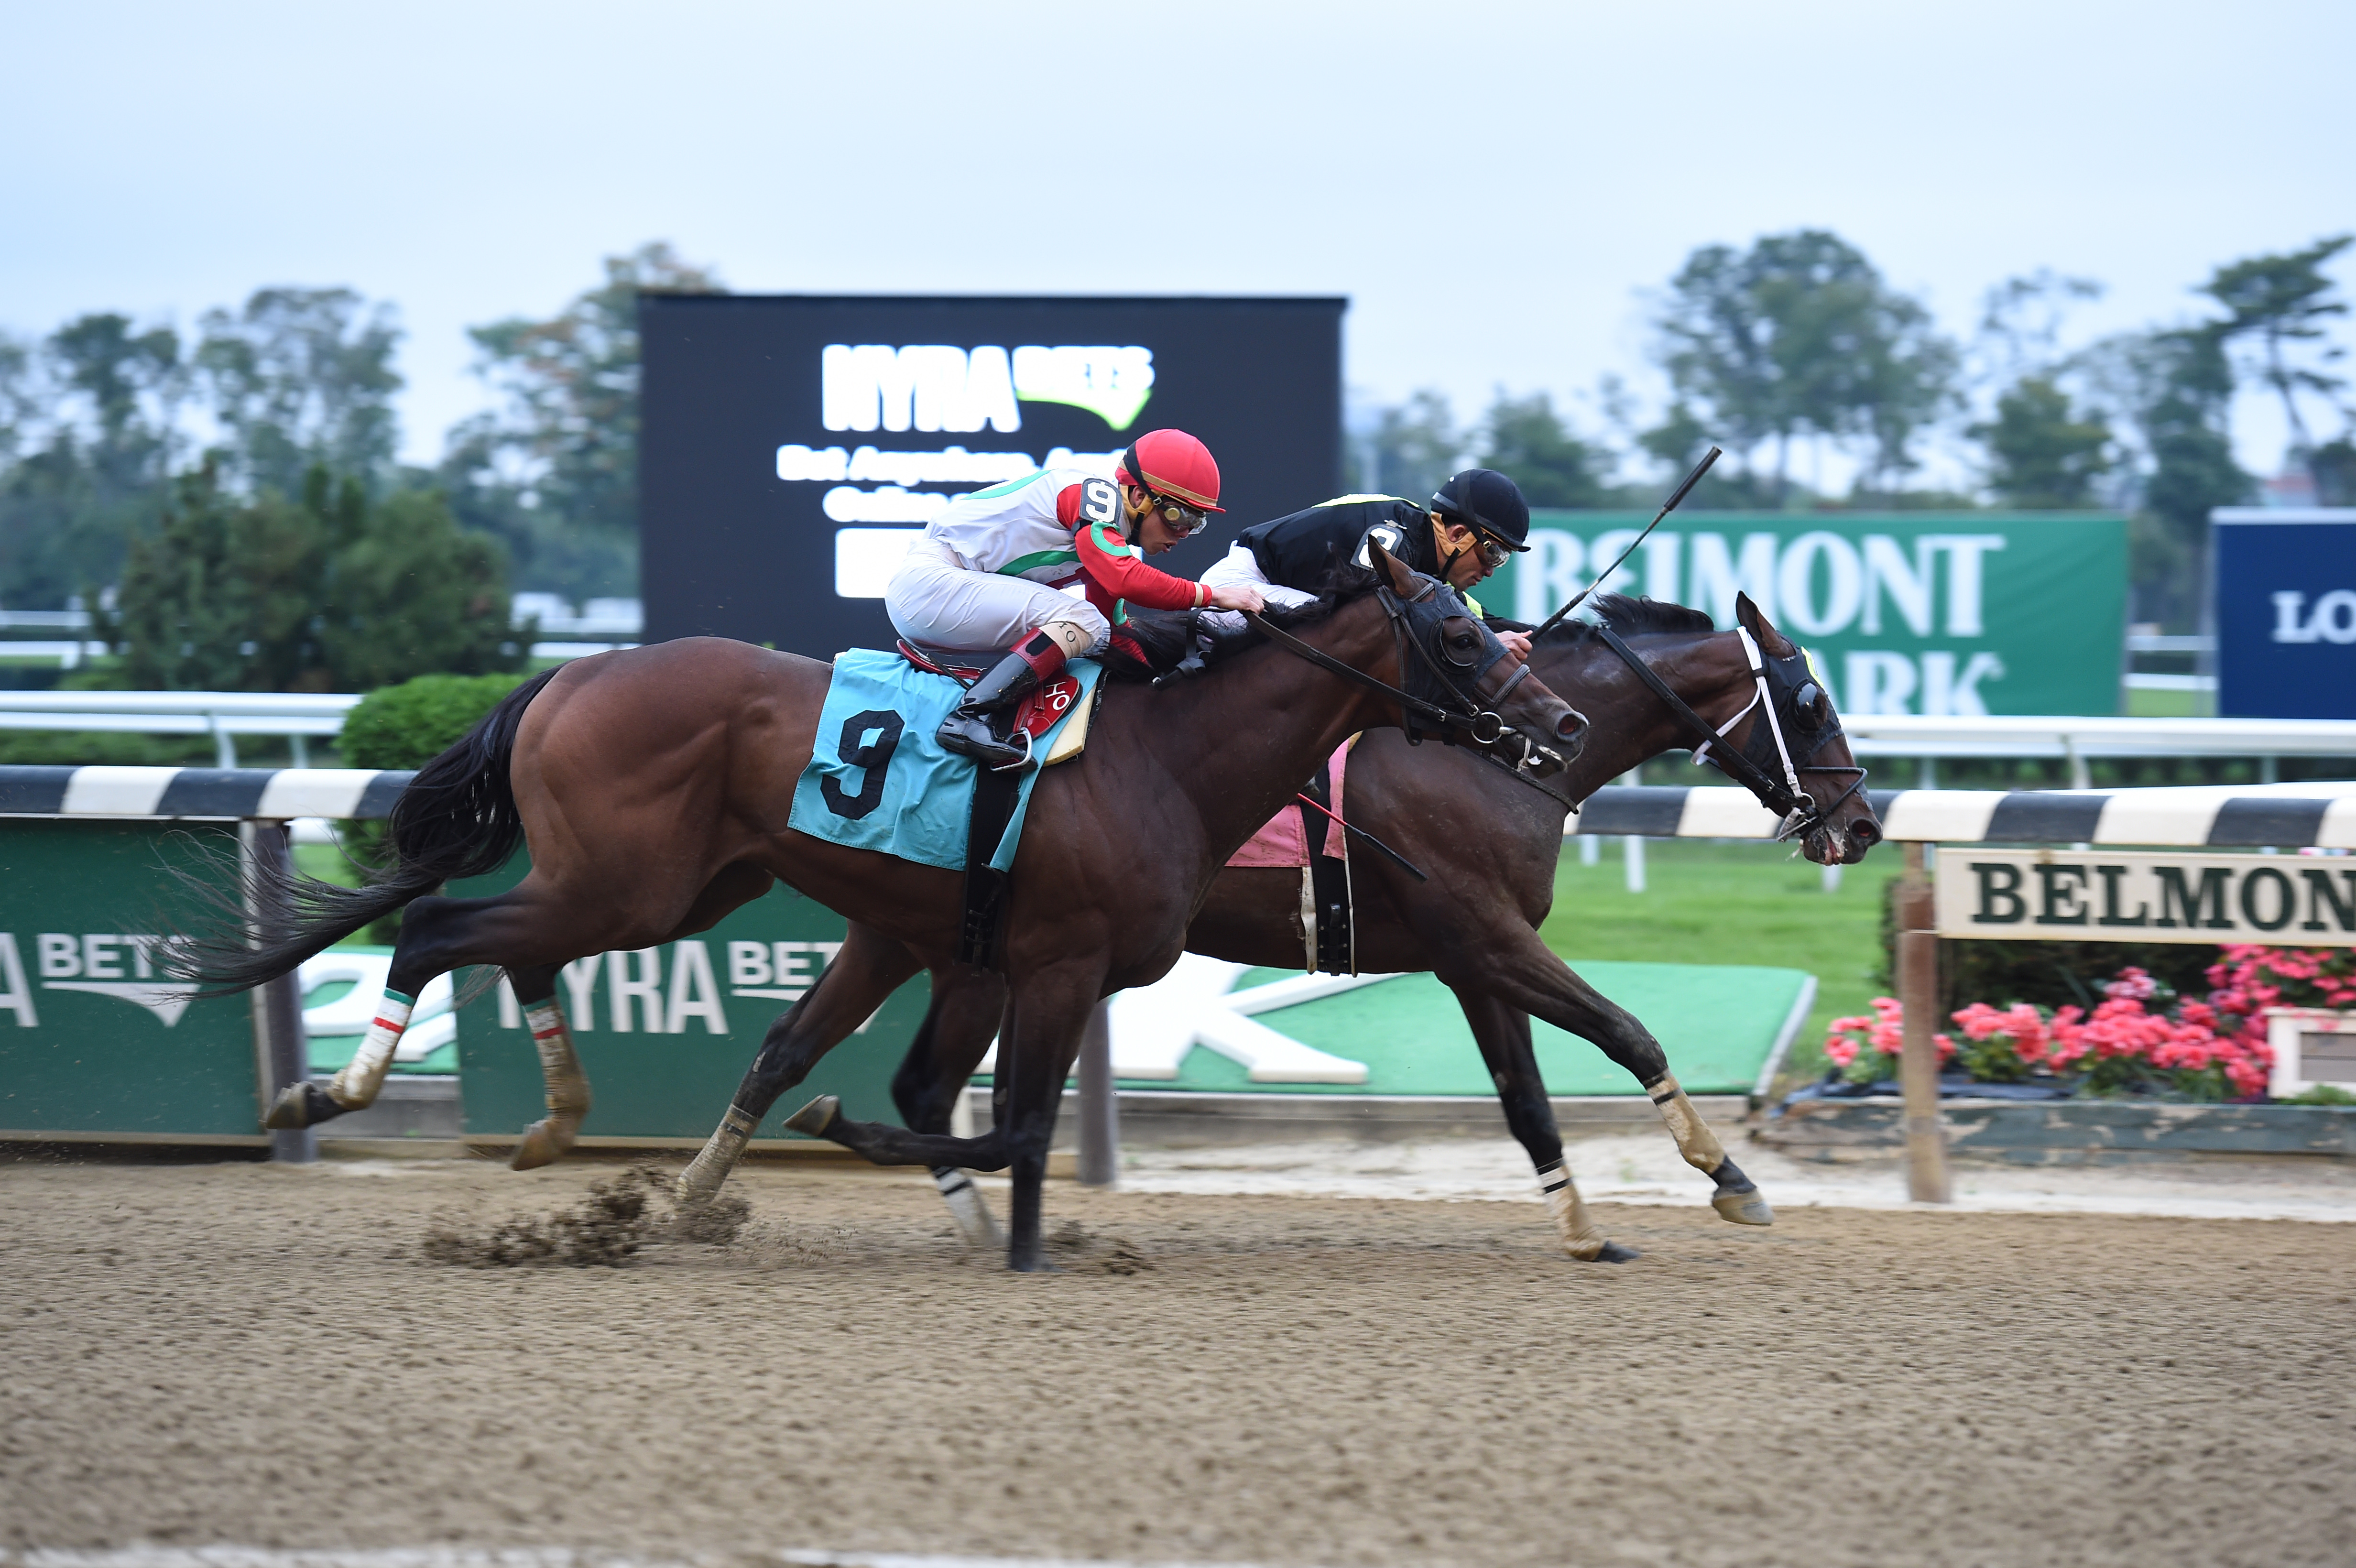 River Date, bred by Henry Carroll, went inside to score a win by a head over Do Share at Belmont October 2nd. Courtesy of Coglianese Photo.